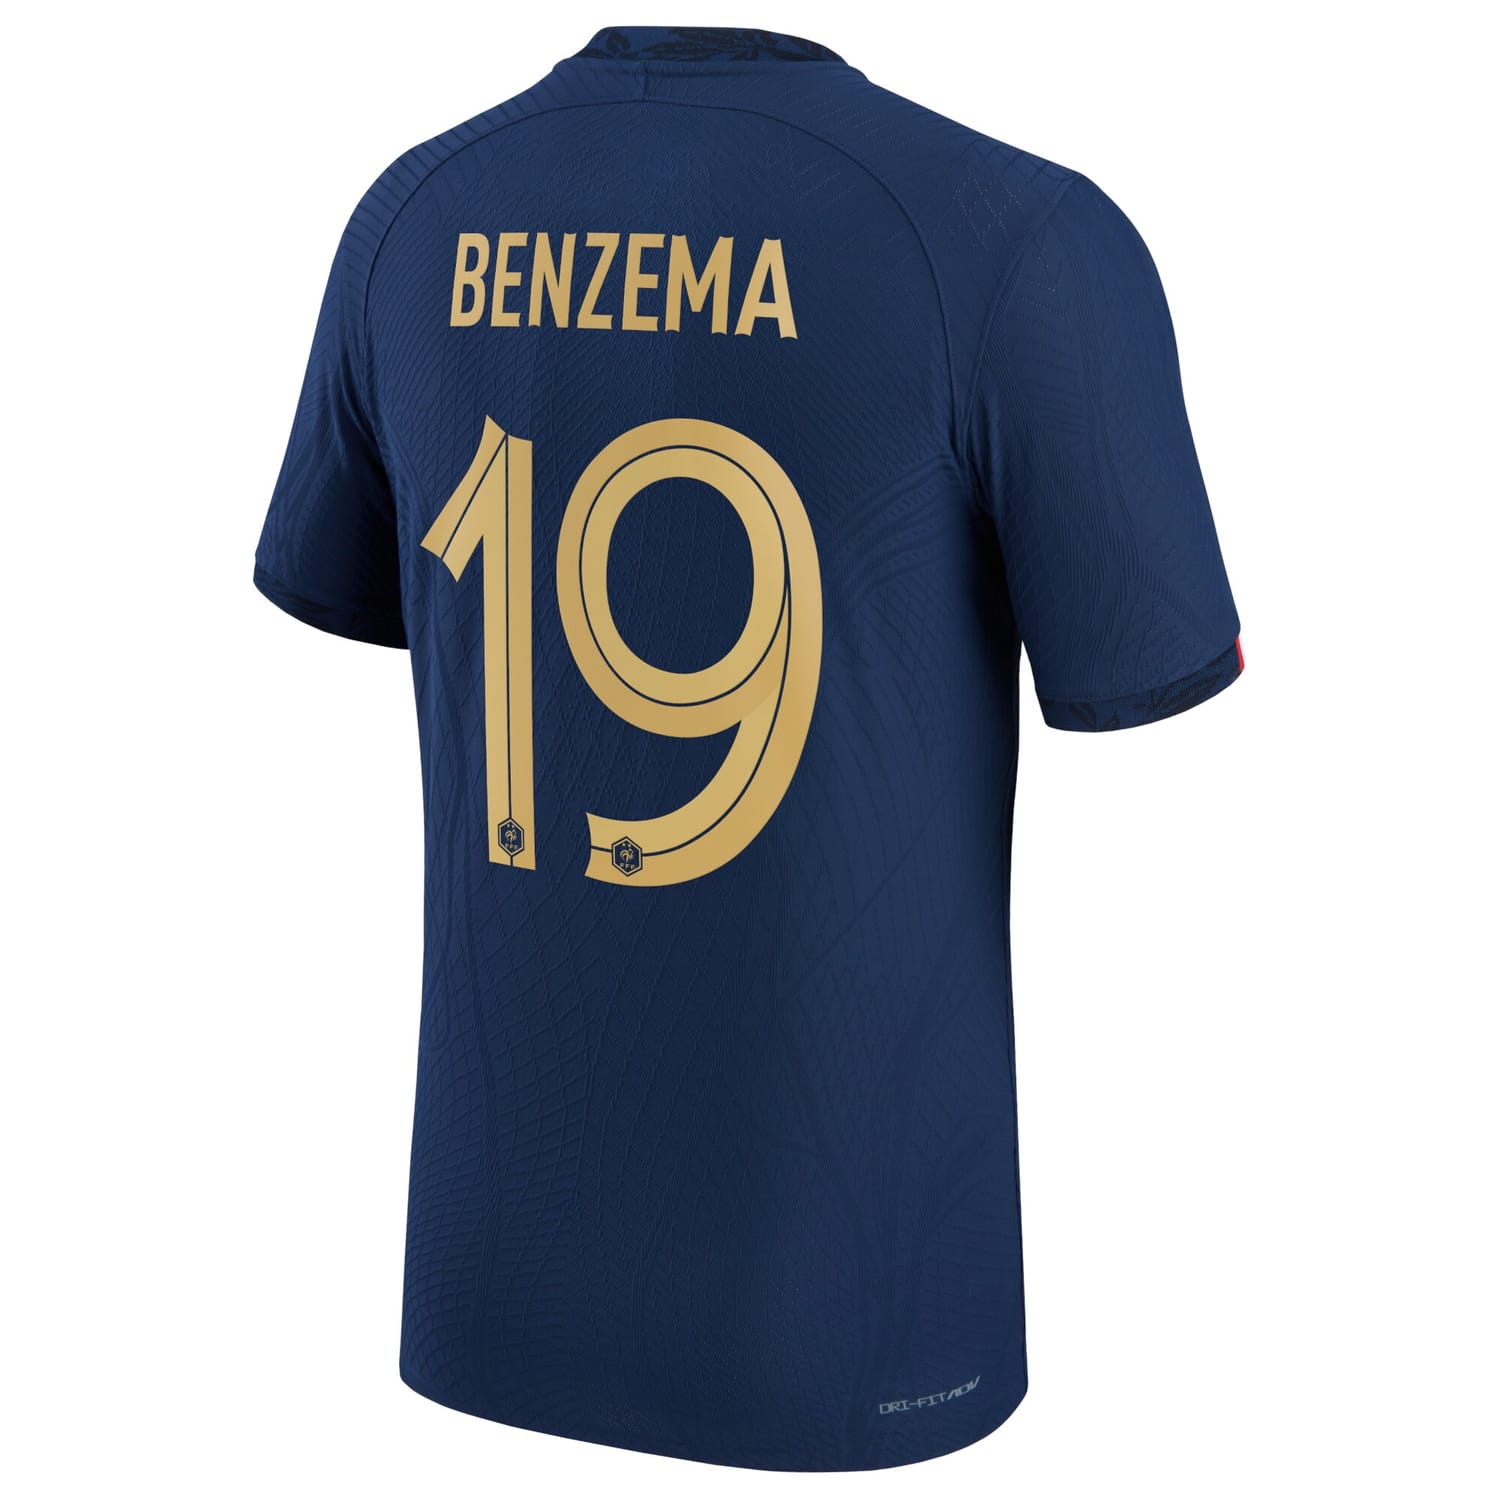 France National Team Home Authentic Jersey Shirt 2022 player Karim Benzema 19 printing for Men